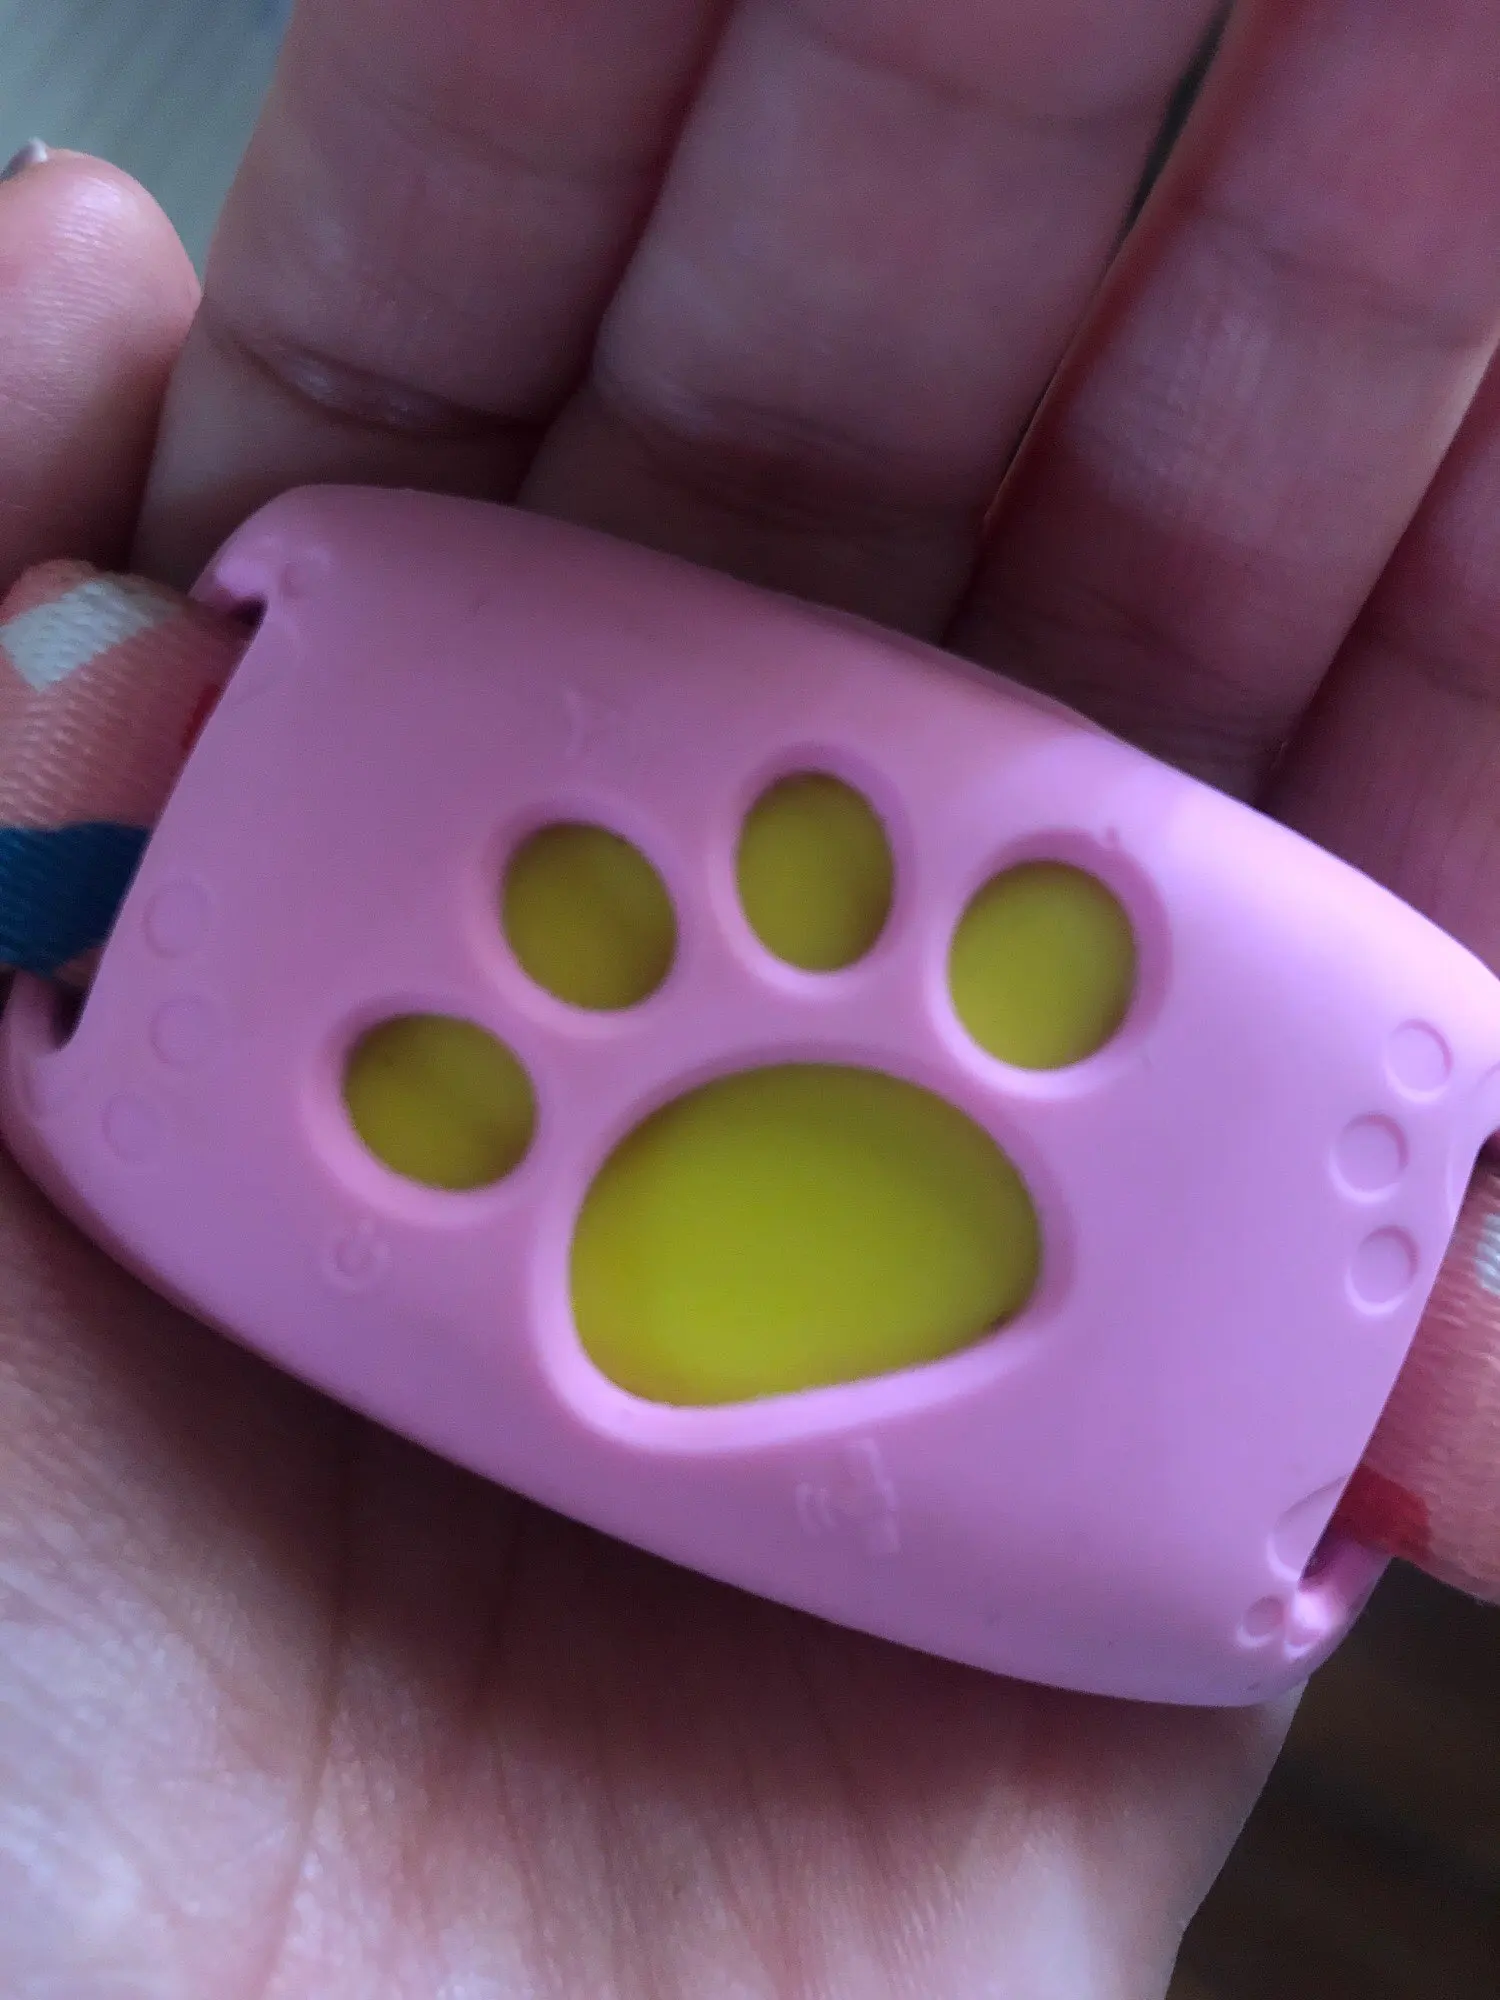 Cat Gps Tracker Locator Device For Pets photo review